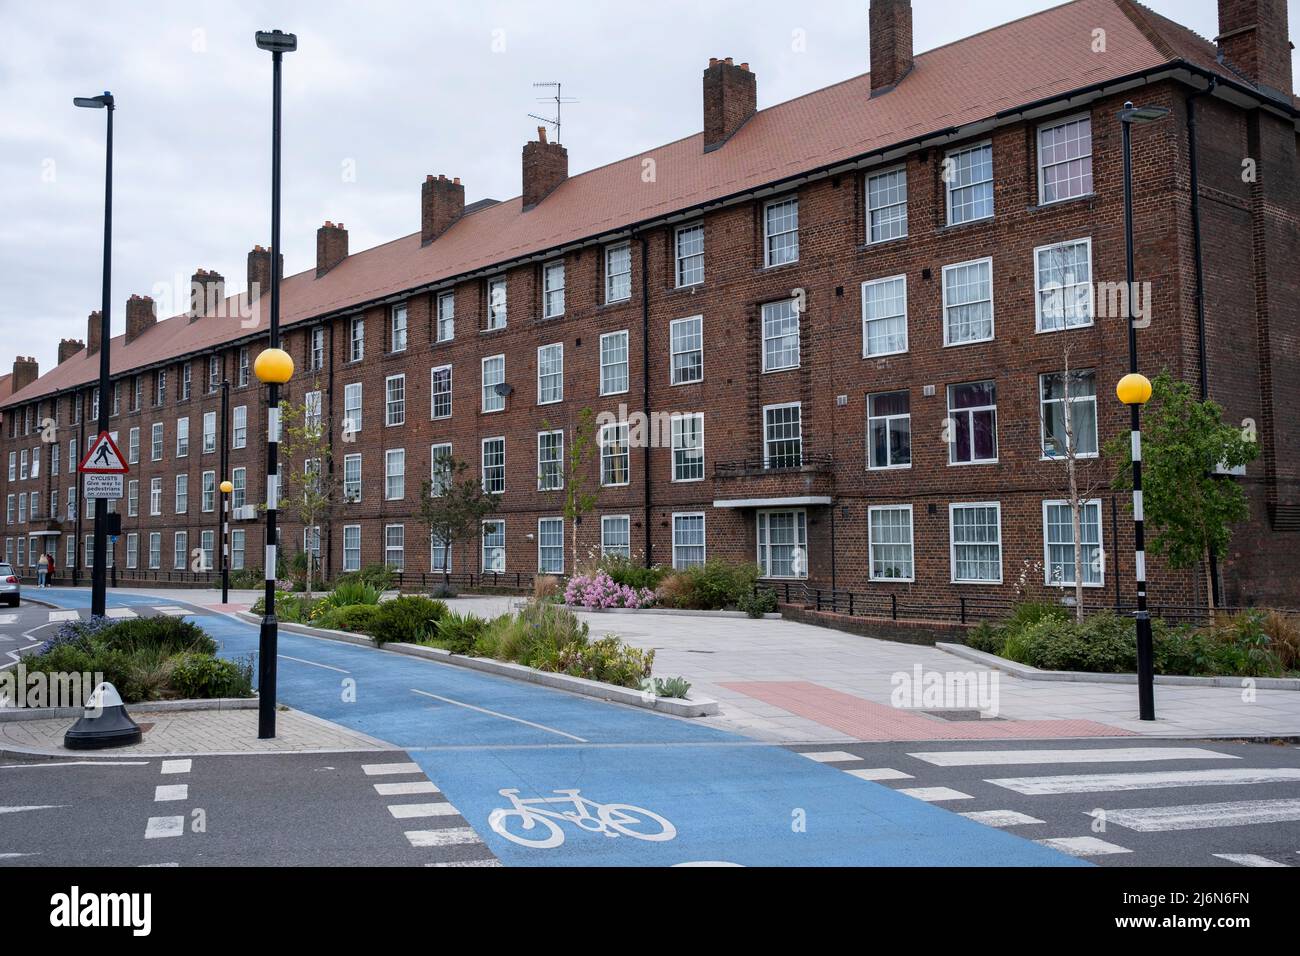 Cycle lane beside social housing block in Shadwell on 27th April 2022 in London, United Kingdom. Cycle Superhighway 3 or CS3 is a long cycle path and part of the Cycleway network coordinated by TfL. It runs from east to central London. It is a popular route with both commuter and leisure cyclists, passing a number of major destinations in London along its route. For almost the entire route, cyclists are separated from other traffic in segregated cycle lanes, and cycling infrastructure has been provided at major interchanges. CS3 has now been renamed to Cycleway 3 or C3. Council estates like th Stock Photo